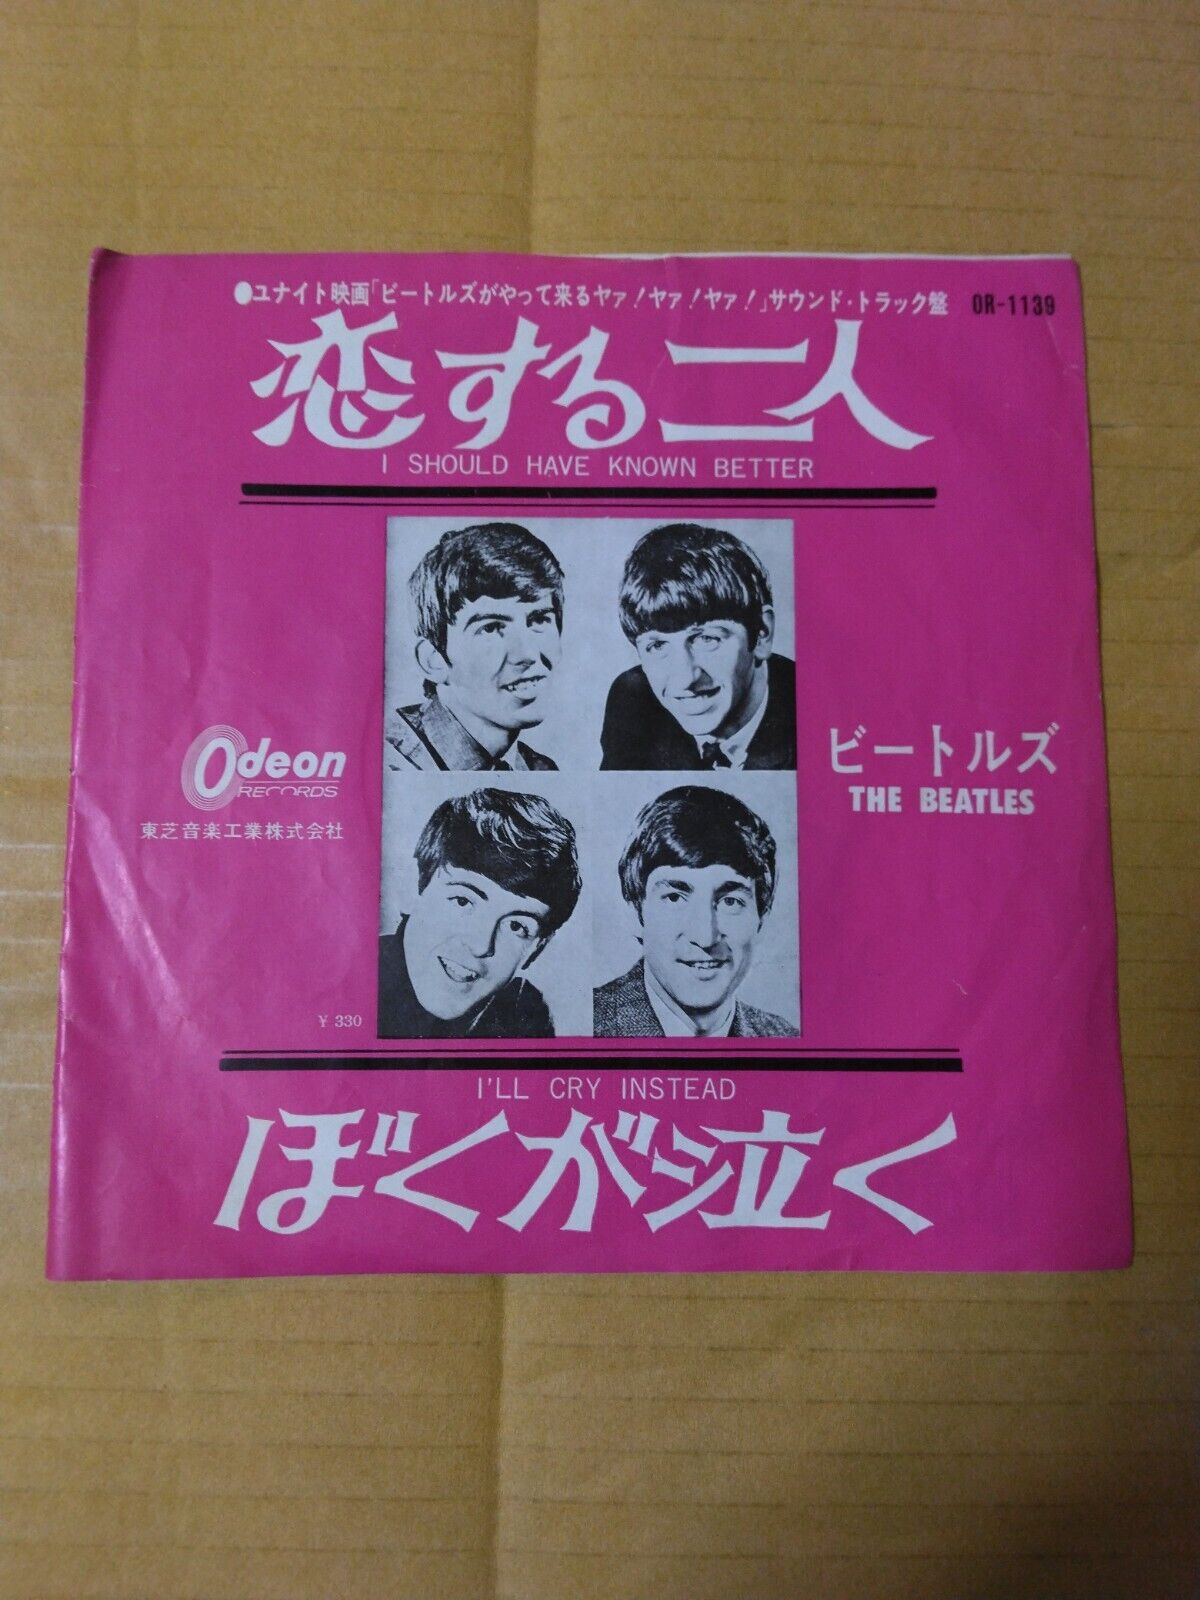 Japanese press 7"   ODEON RED VINYL   THE BEATLES   I SHOULD HAVE KNOWN BETTER